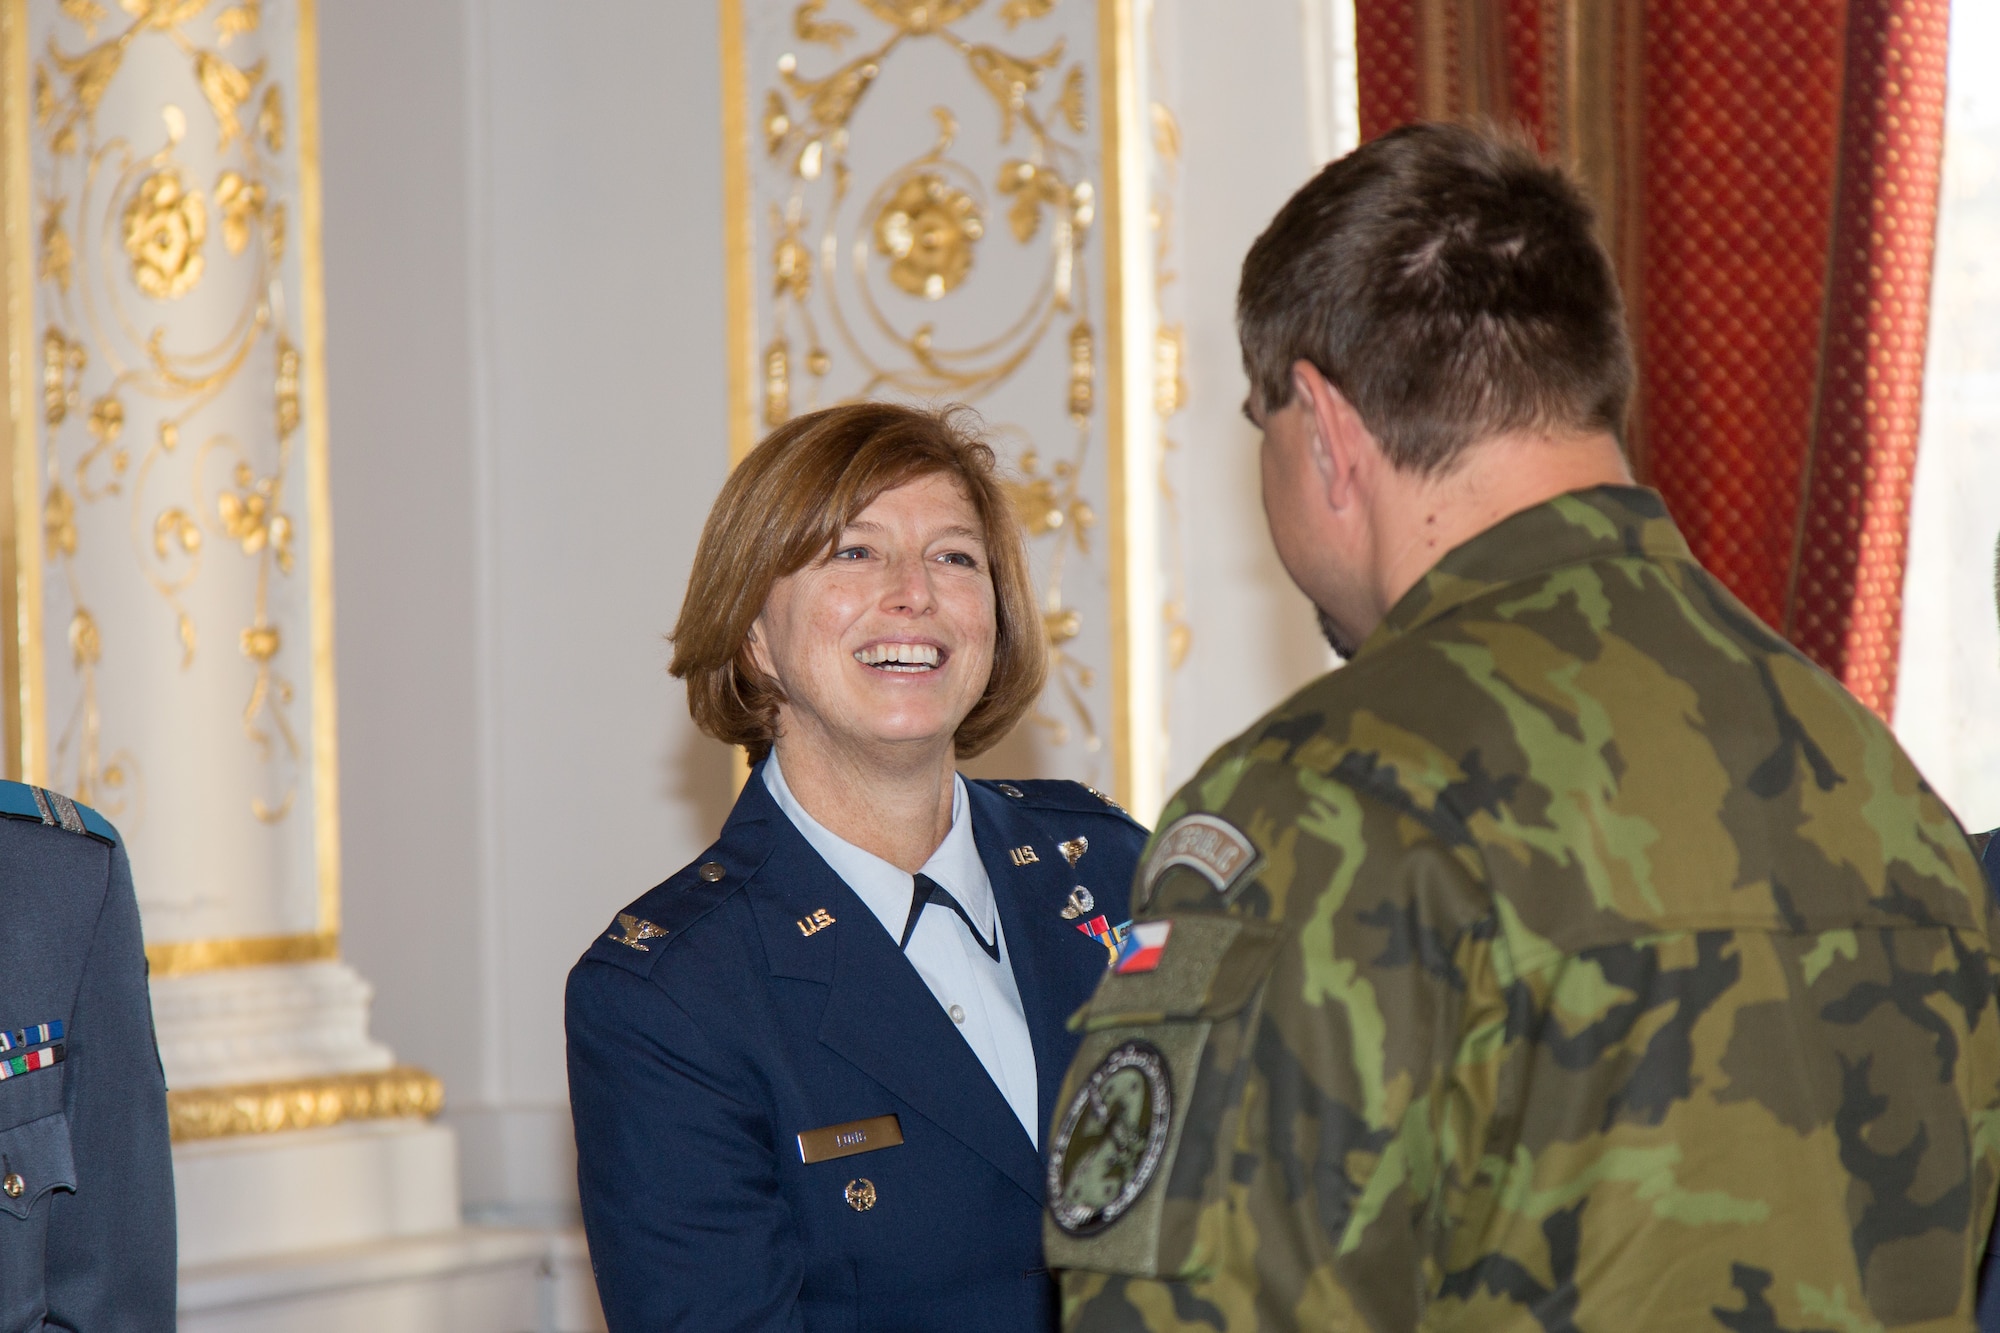 Colonel Jill Long, Deputy Director Plans and Program Analyses, congratulates Sgt. 1st Class Pavel Zelenka from the Czech Republic Air Force on his completion of the first IEAFA combined international officer and NCO PME course during graduation in Sofia, Bulgaria, Nov. 13, 2015.  Twenty-three students from Bulgaria, Czech Republic, Estonia, and Hungary participated in this inagural course. (U.S. Air Force photo/SMSgt Travis Robbins/Released)